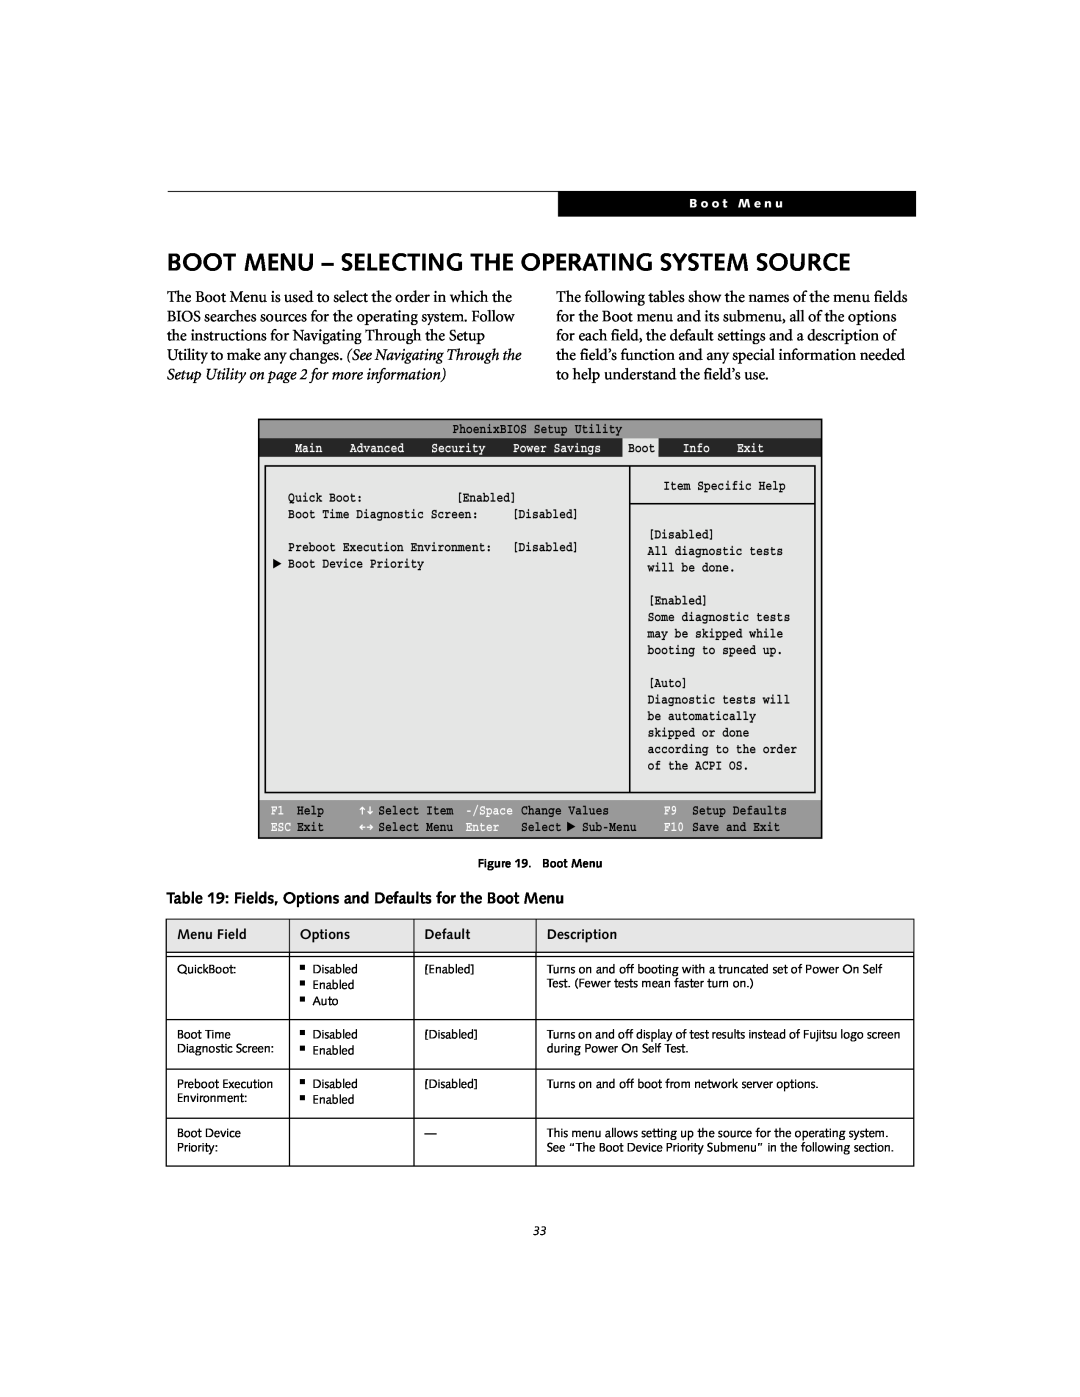 Fujitsu S-5582 manual Boot Menu - Selecting The Operating System Source, Fields, Options and Defaults for the Boot Menu 